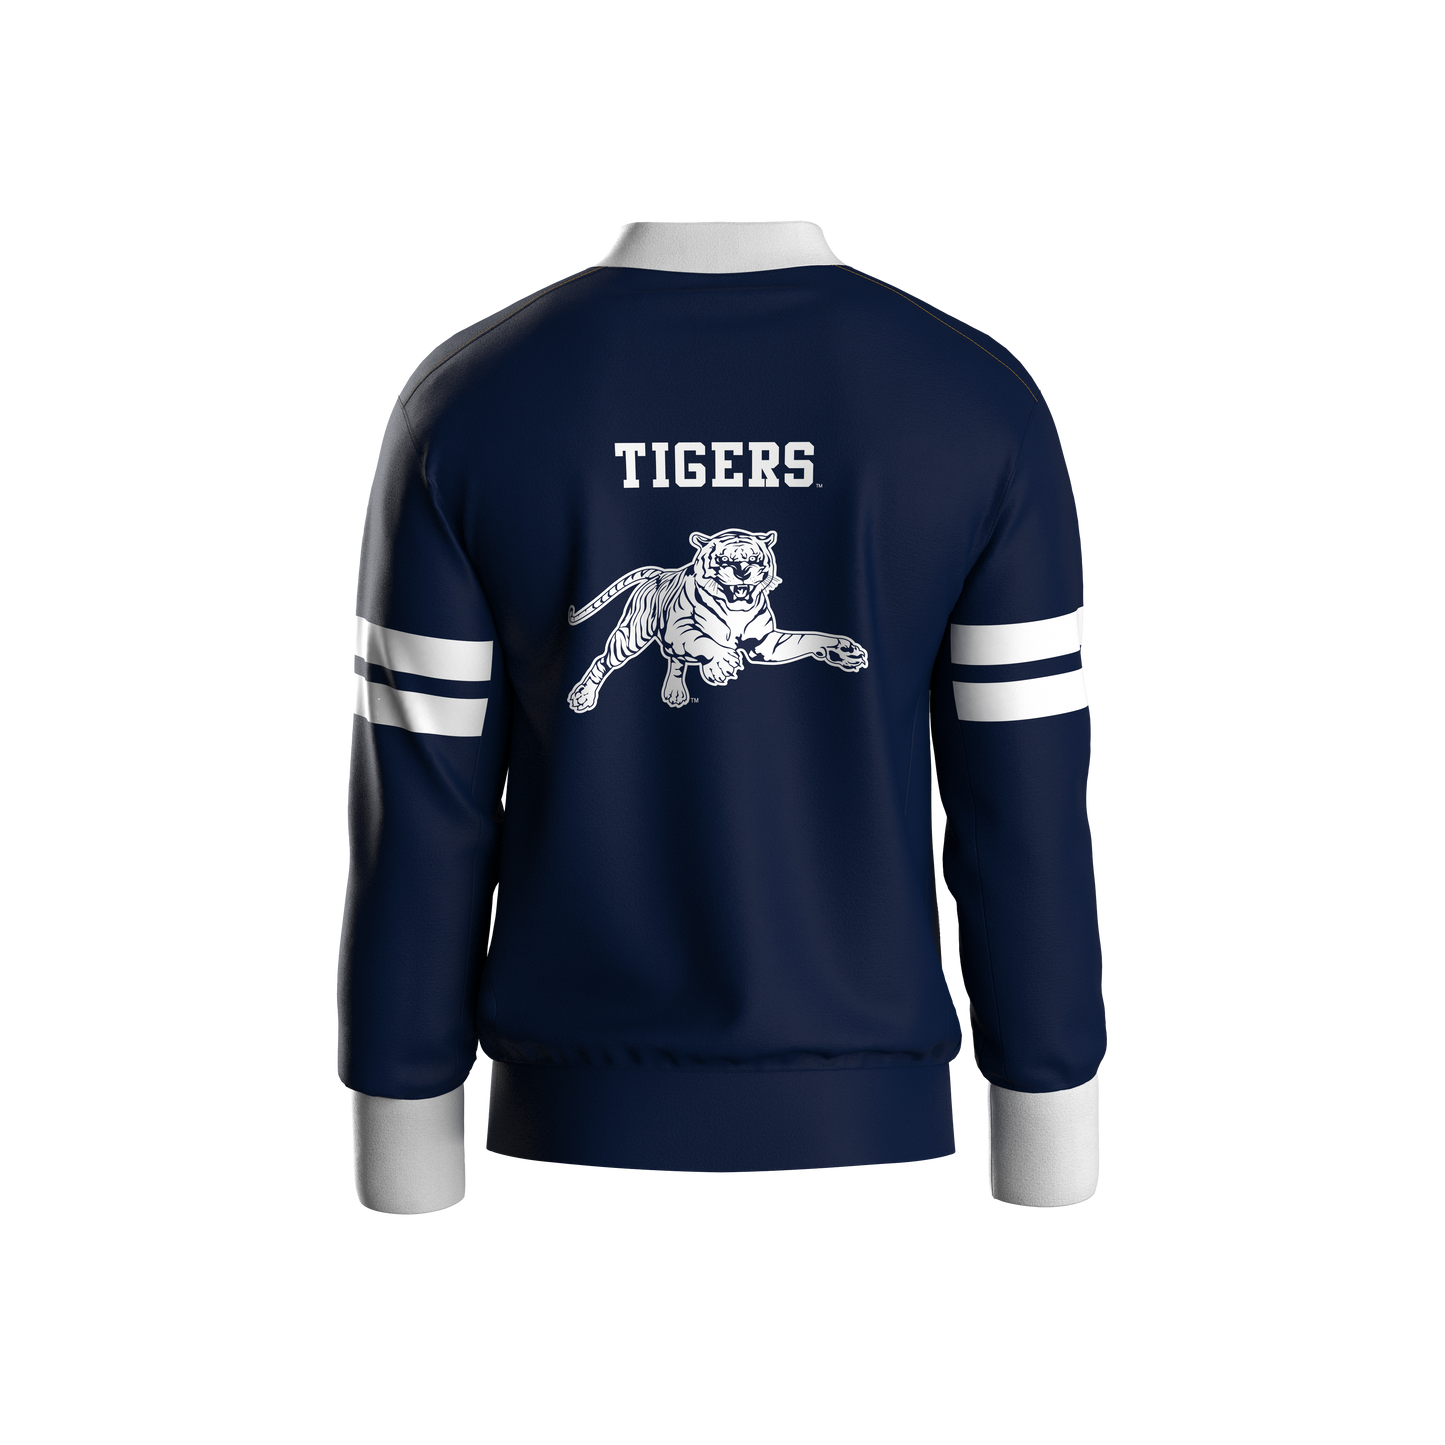 Jackson State University Home Pullover (youth)